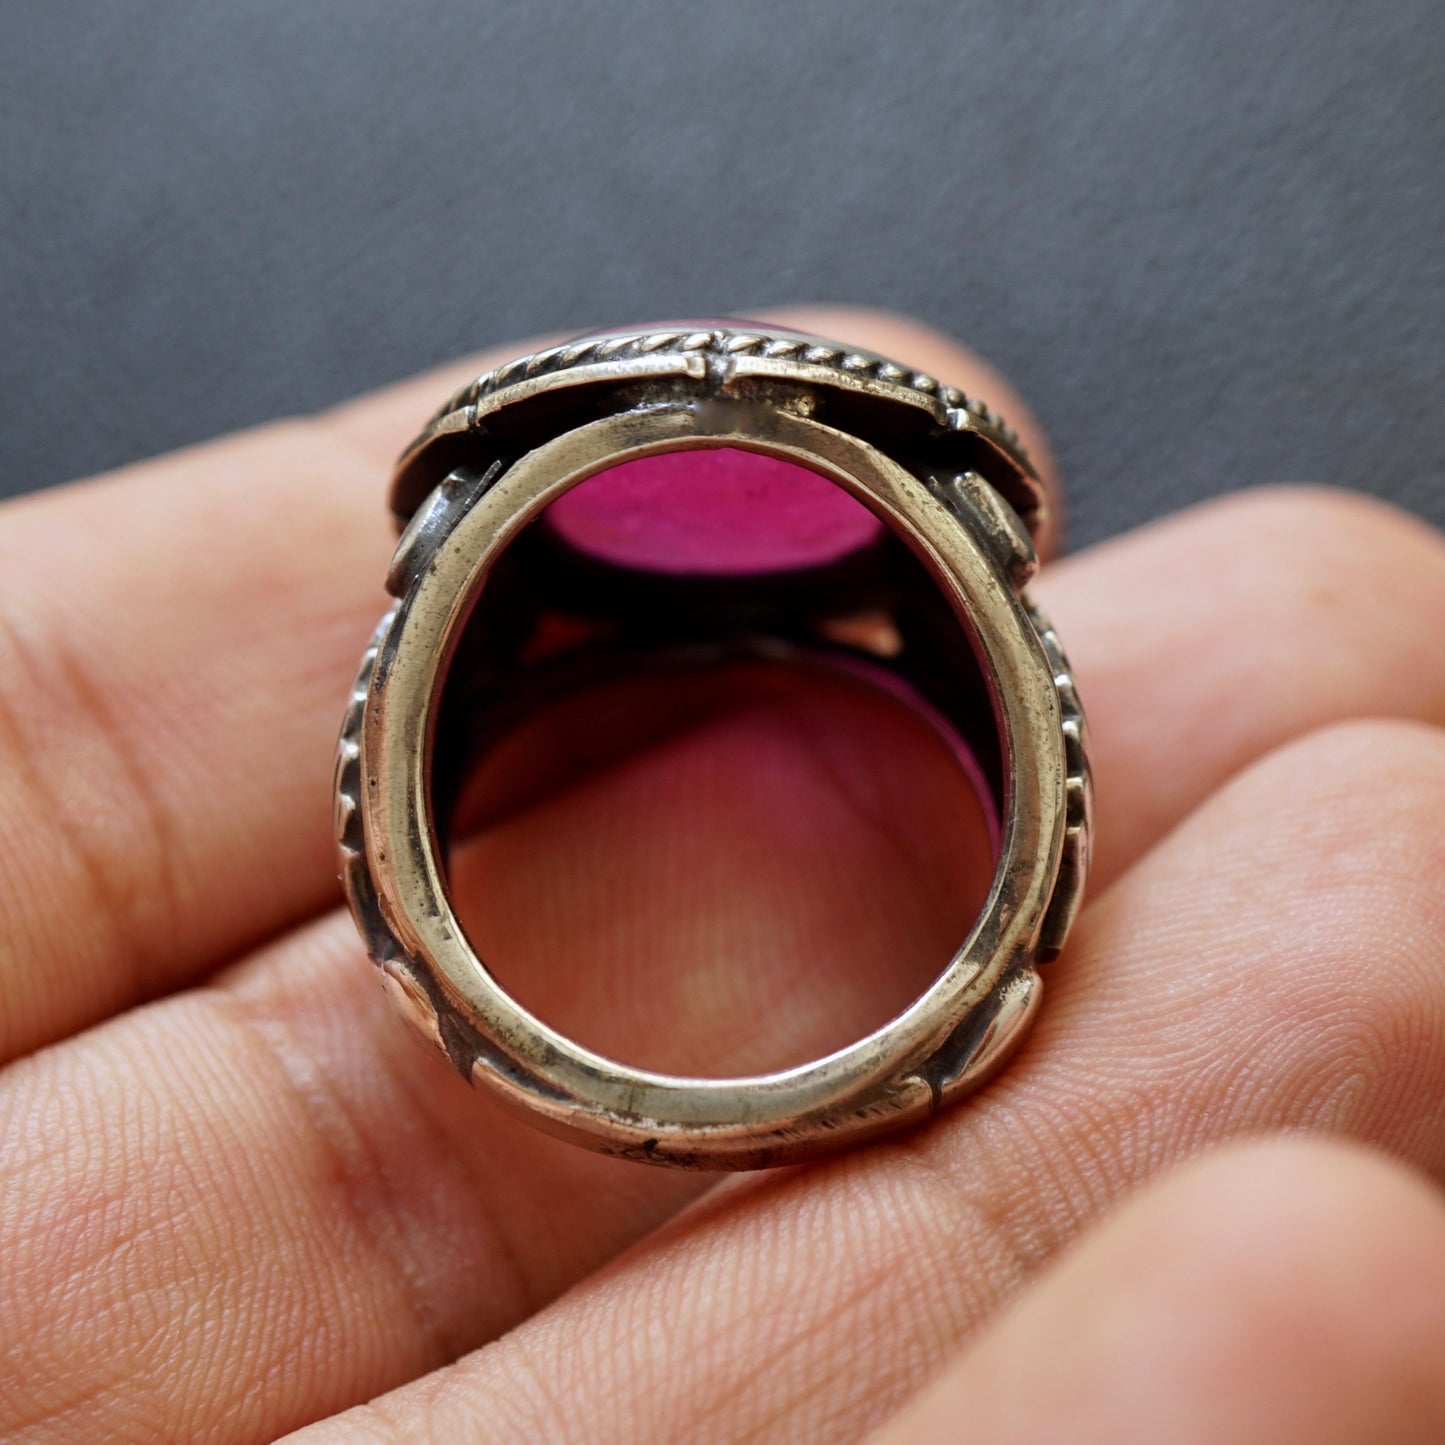 Pink Ruby Men's Ring Sterling Silver Unique Handmade Artisan Jewelry